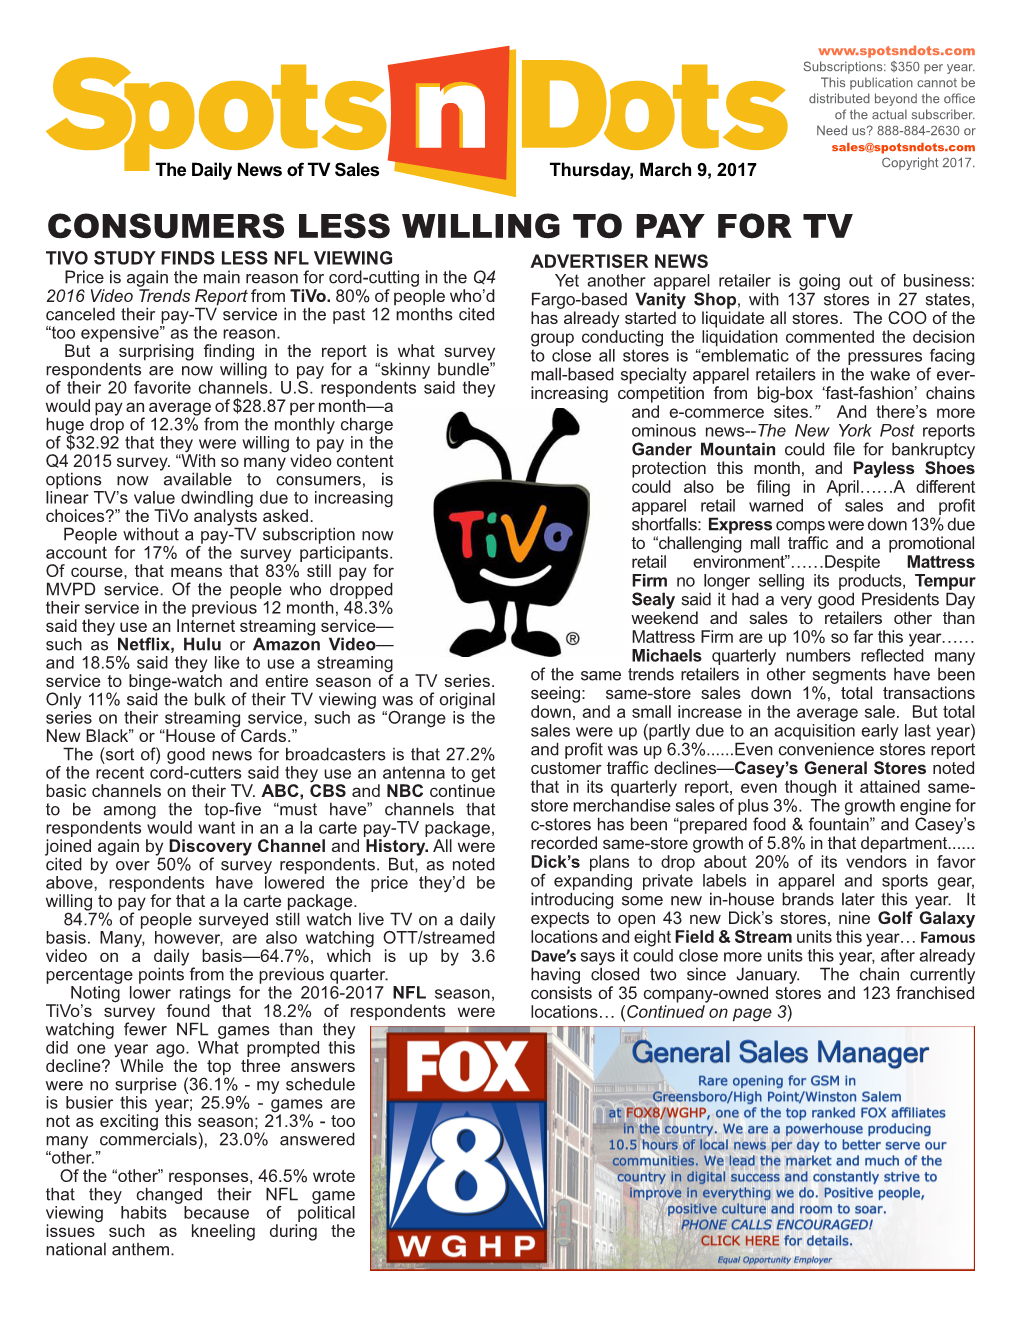 Consumers Less Willing to Pay for Tv